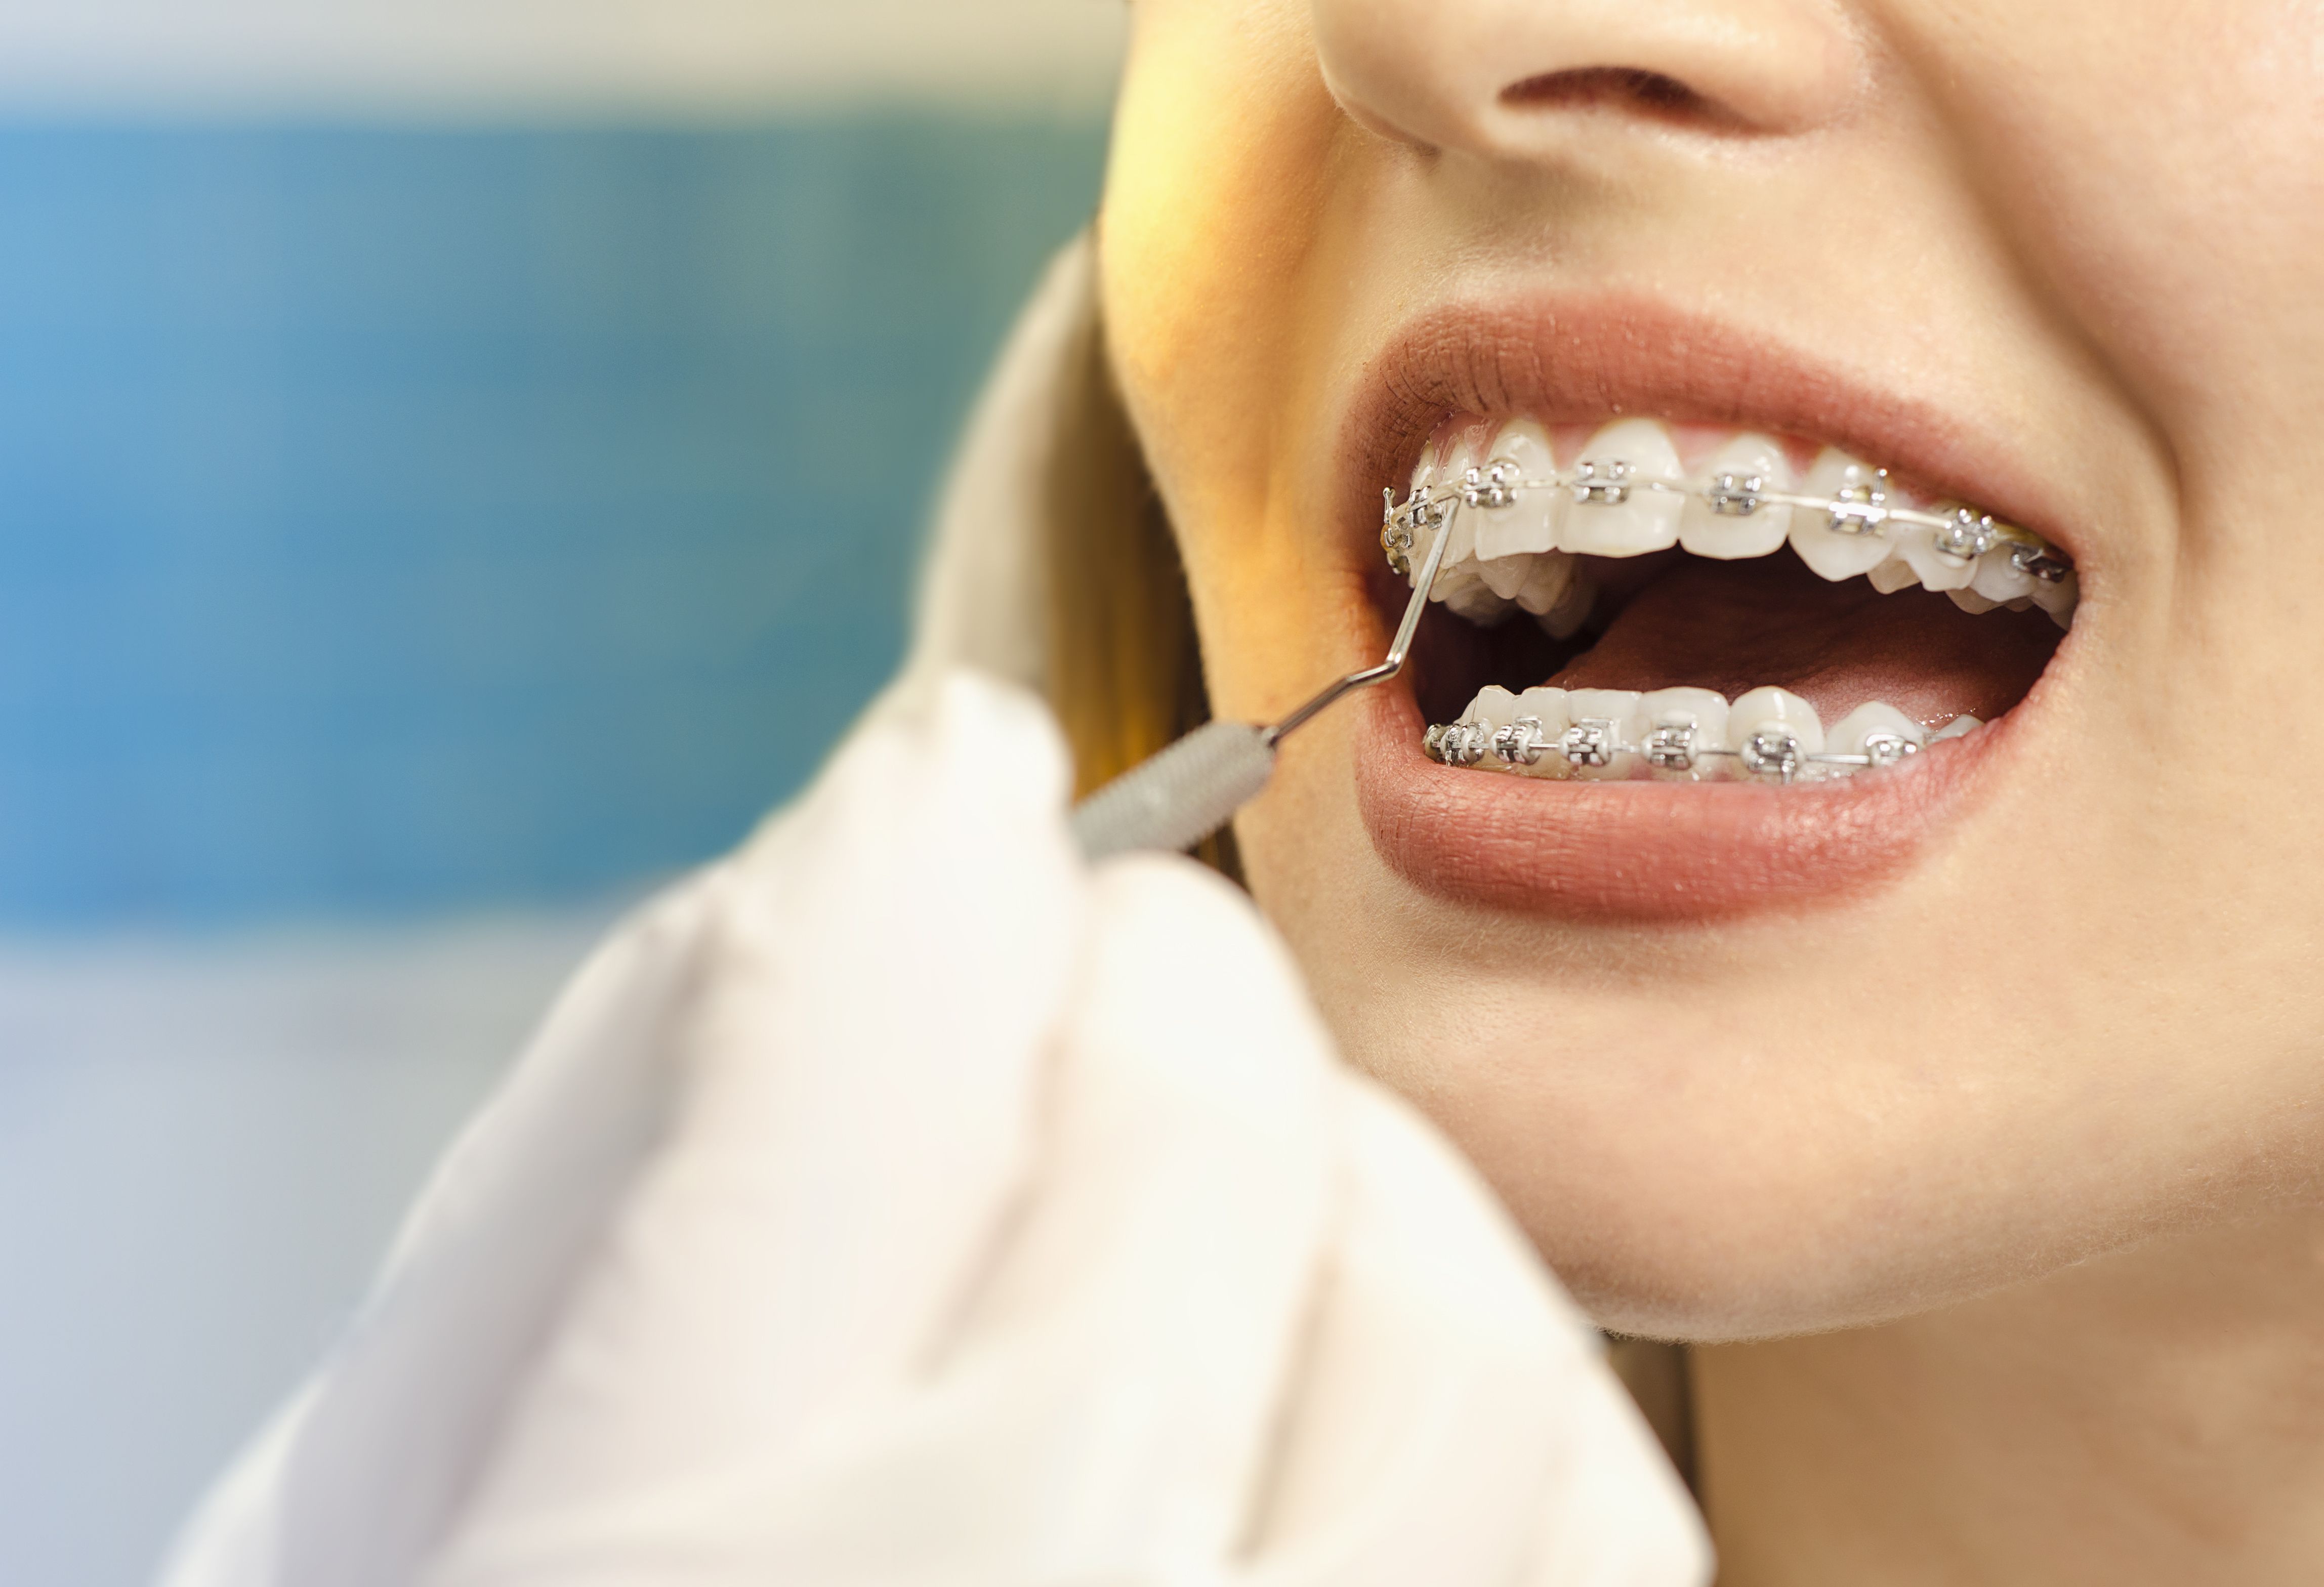 7 Things To Know About Adult Braces - Types, Treatment, Options